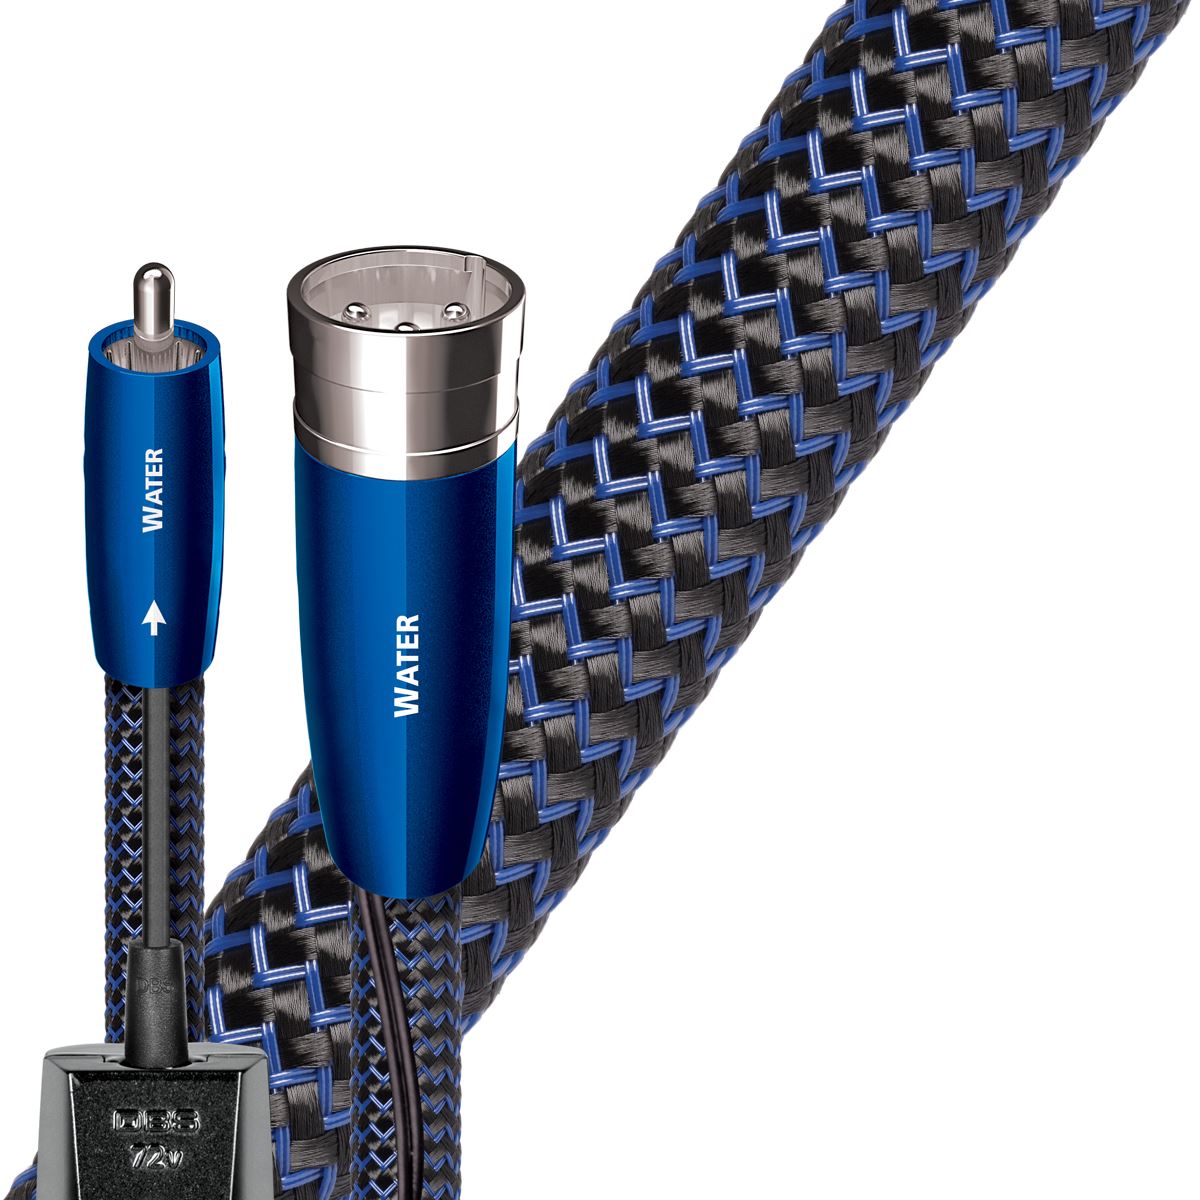 AUDIOQUEST_Water_2M_XLR_to_XLR_pair._Solid_perfect_surface_copper_plus._Triple_balanced._Polyethylene_air-tubes._Cold-welded,silver_over_copper_TER_Jacket_-_blue_-_black_braid 2060